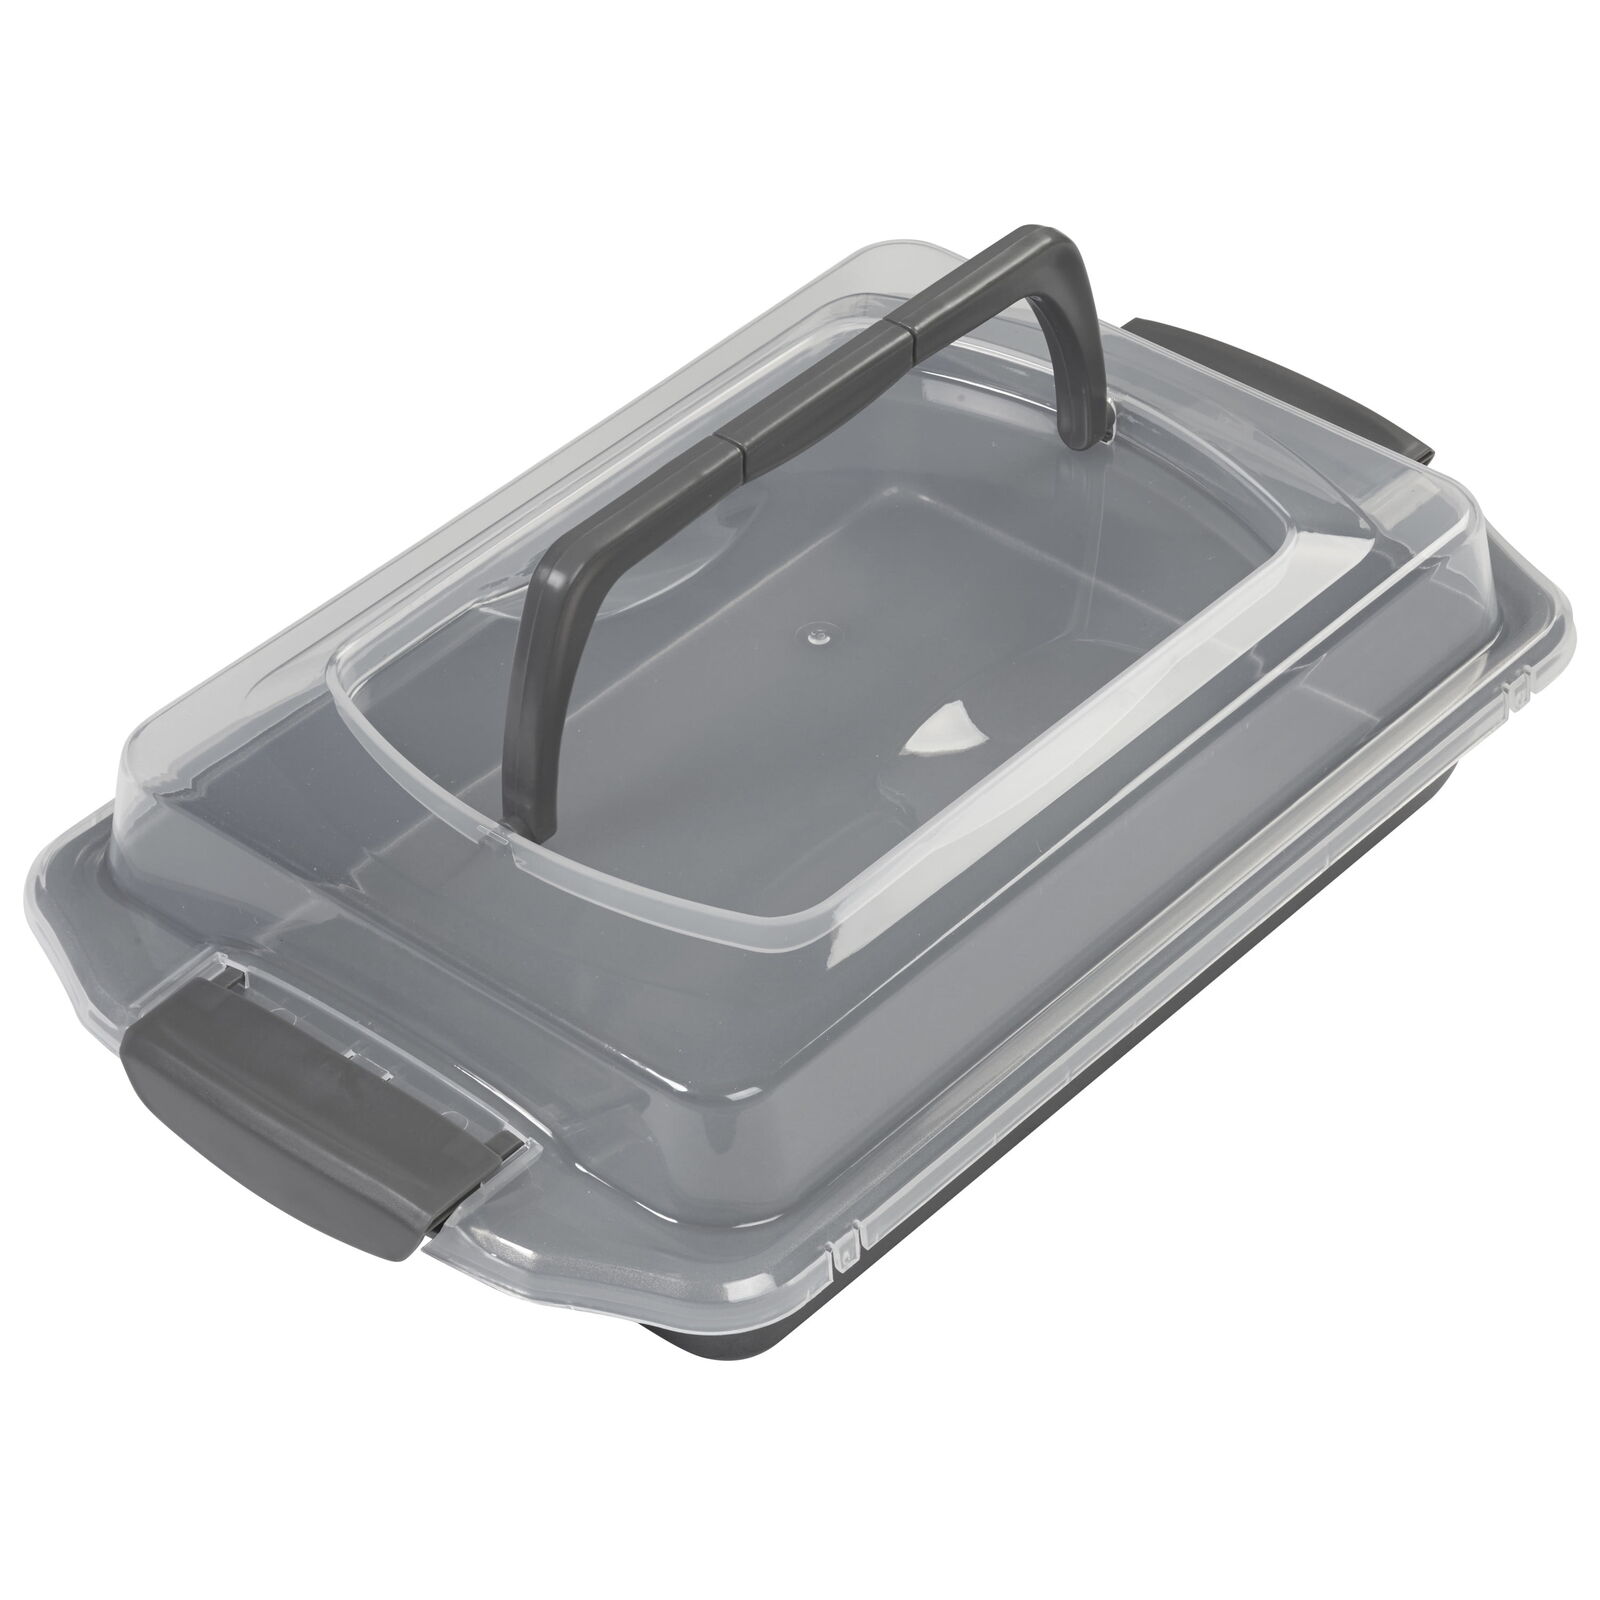 Wilton Bake It Better Steel Non-Stick Oblong Cake Pan with Lid